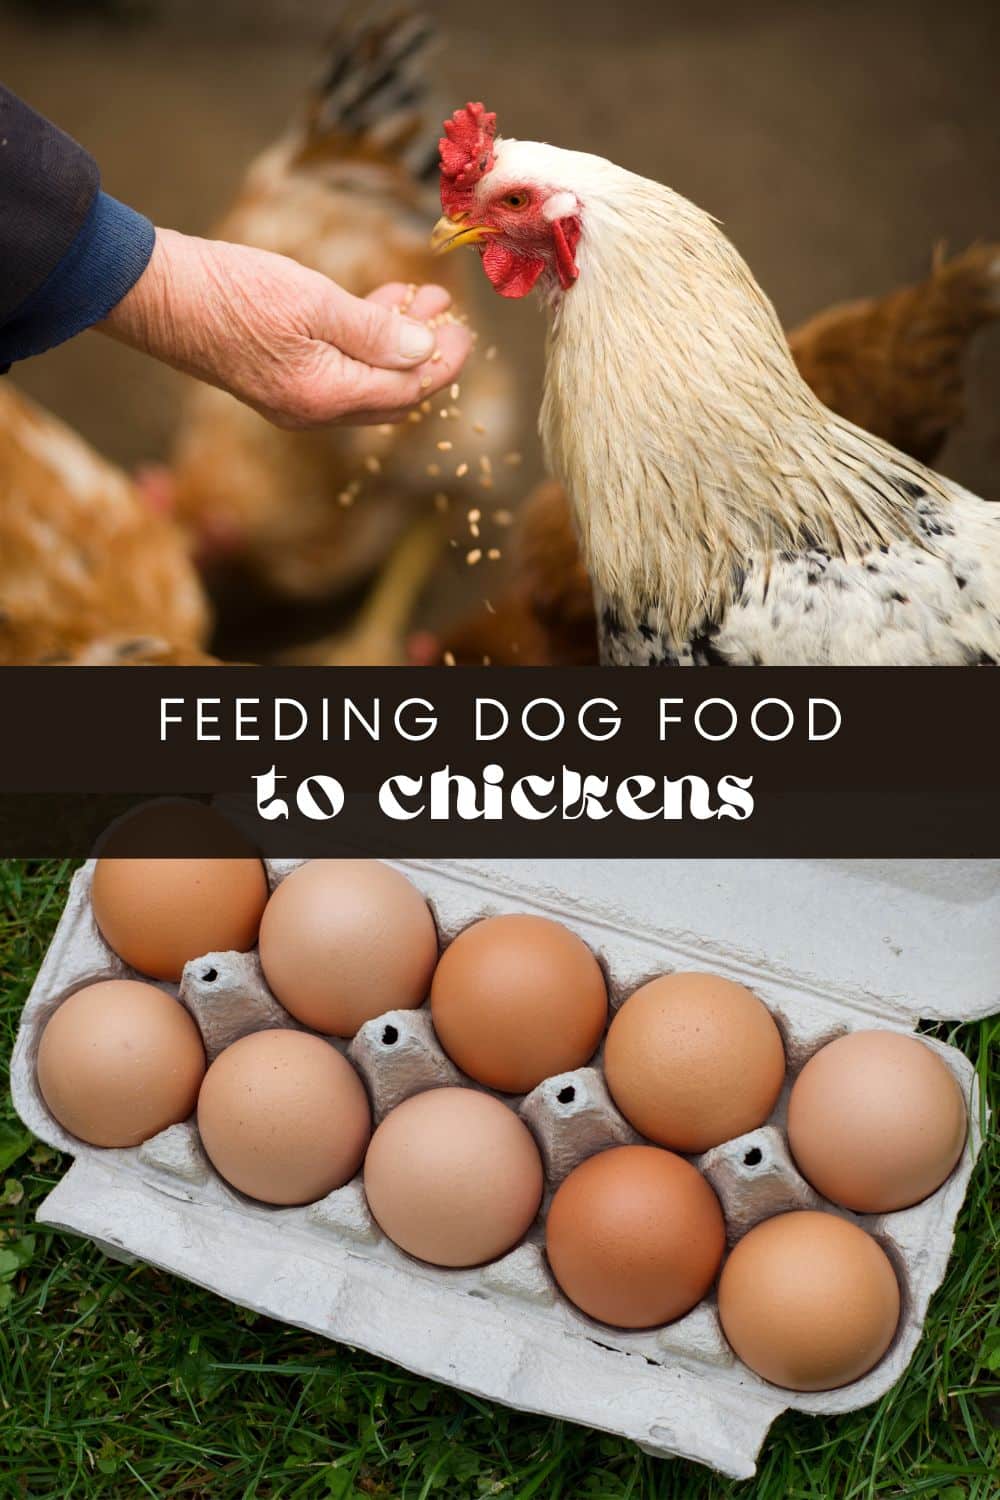 While chickens can technically eat dog food, feeding chickens dog food is not a good idea. Dog food is formulated to meet the dietary requirements of dogs, which are different from those of chickens.